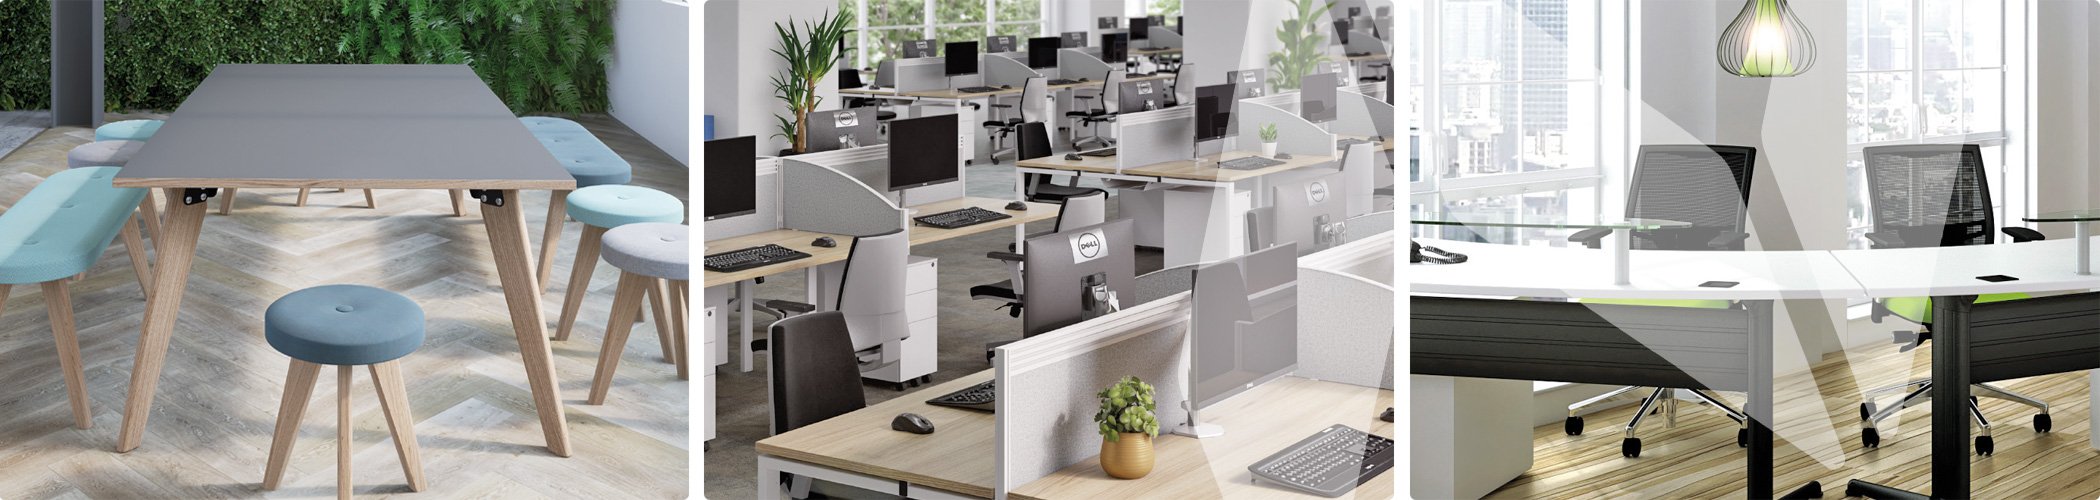 Neil Andrew Office Solutions are a leading provider and installer of office and educational furniture in the UK